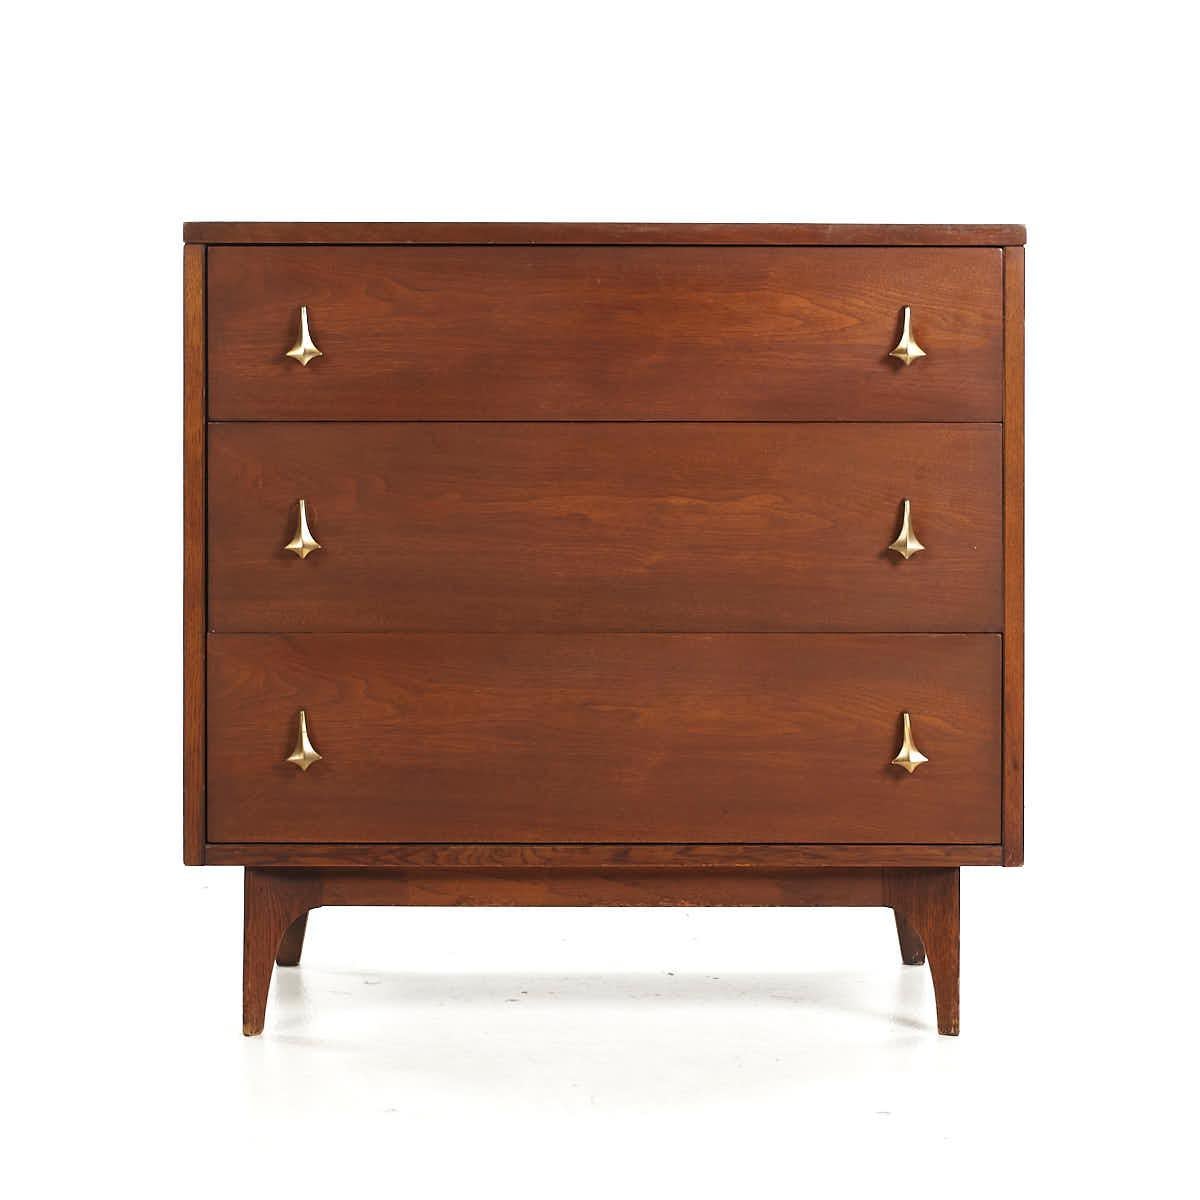 Broyhill Brasilia Mid Century Walnut Dresser Chest of Drawers

This dresser measures: 30.75 wide x 17 deep x 29.75 high

All pieces of furniture can be had in what we call restored vintage condition. That means the piece is restored upon purchase so